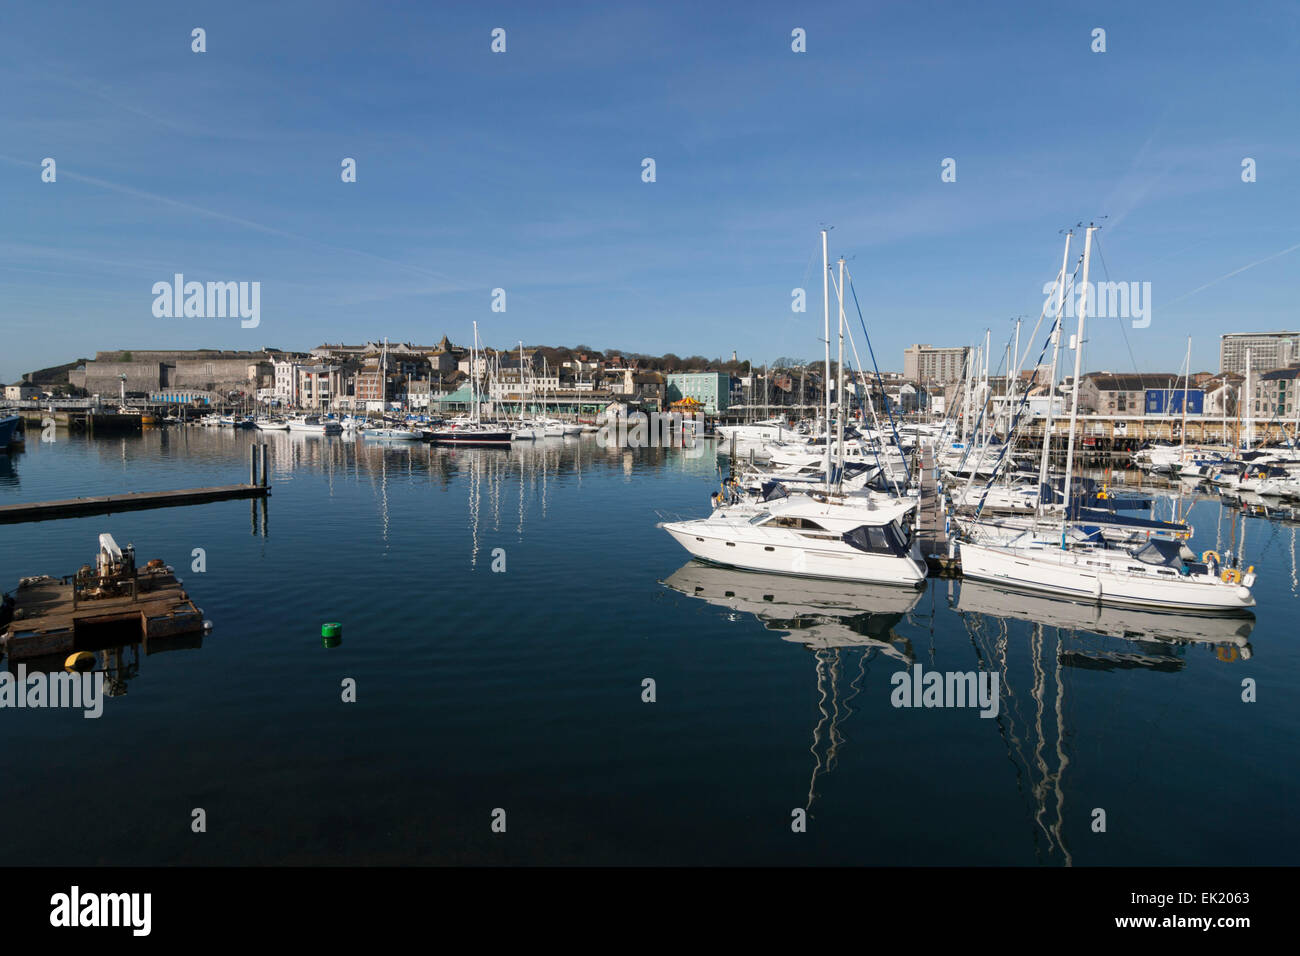 Yachts and motor vessels moored at the Sutton Harbour marina, Plymouth, UK Stock Photo